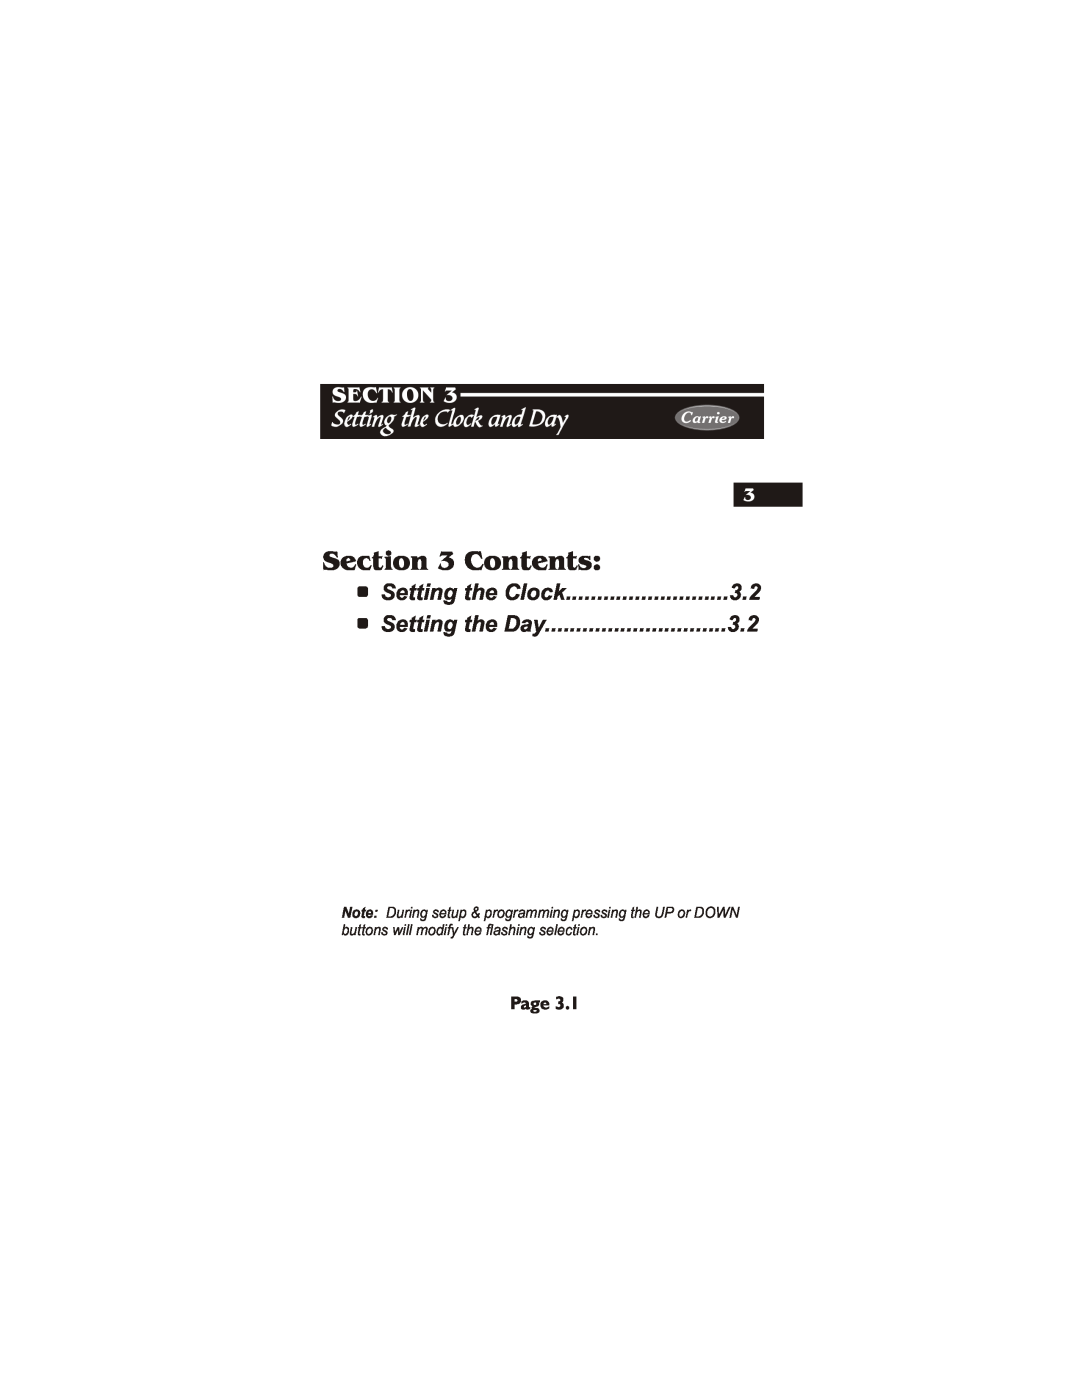 Carrier 33CS450-01 owner manual Contents, Setting the Clock and Day, Setting the Day, Section, Page, Carrier 